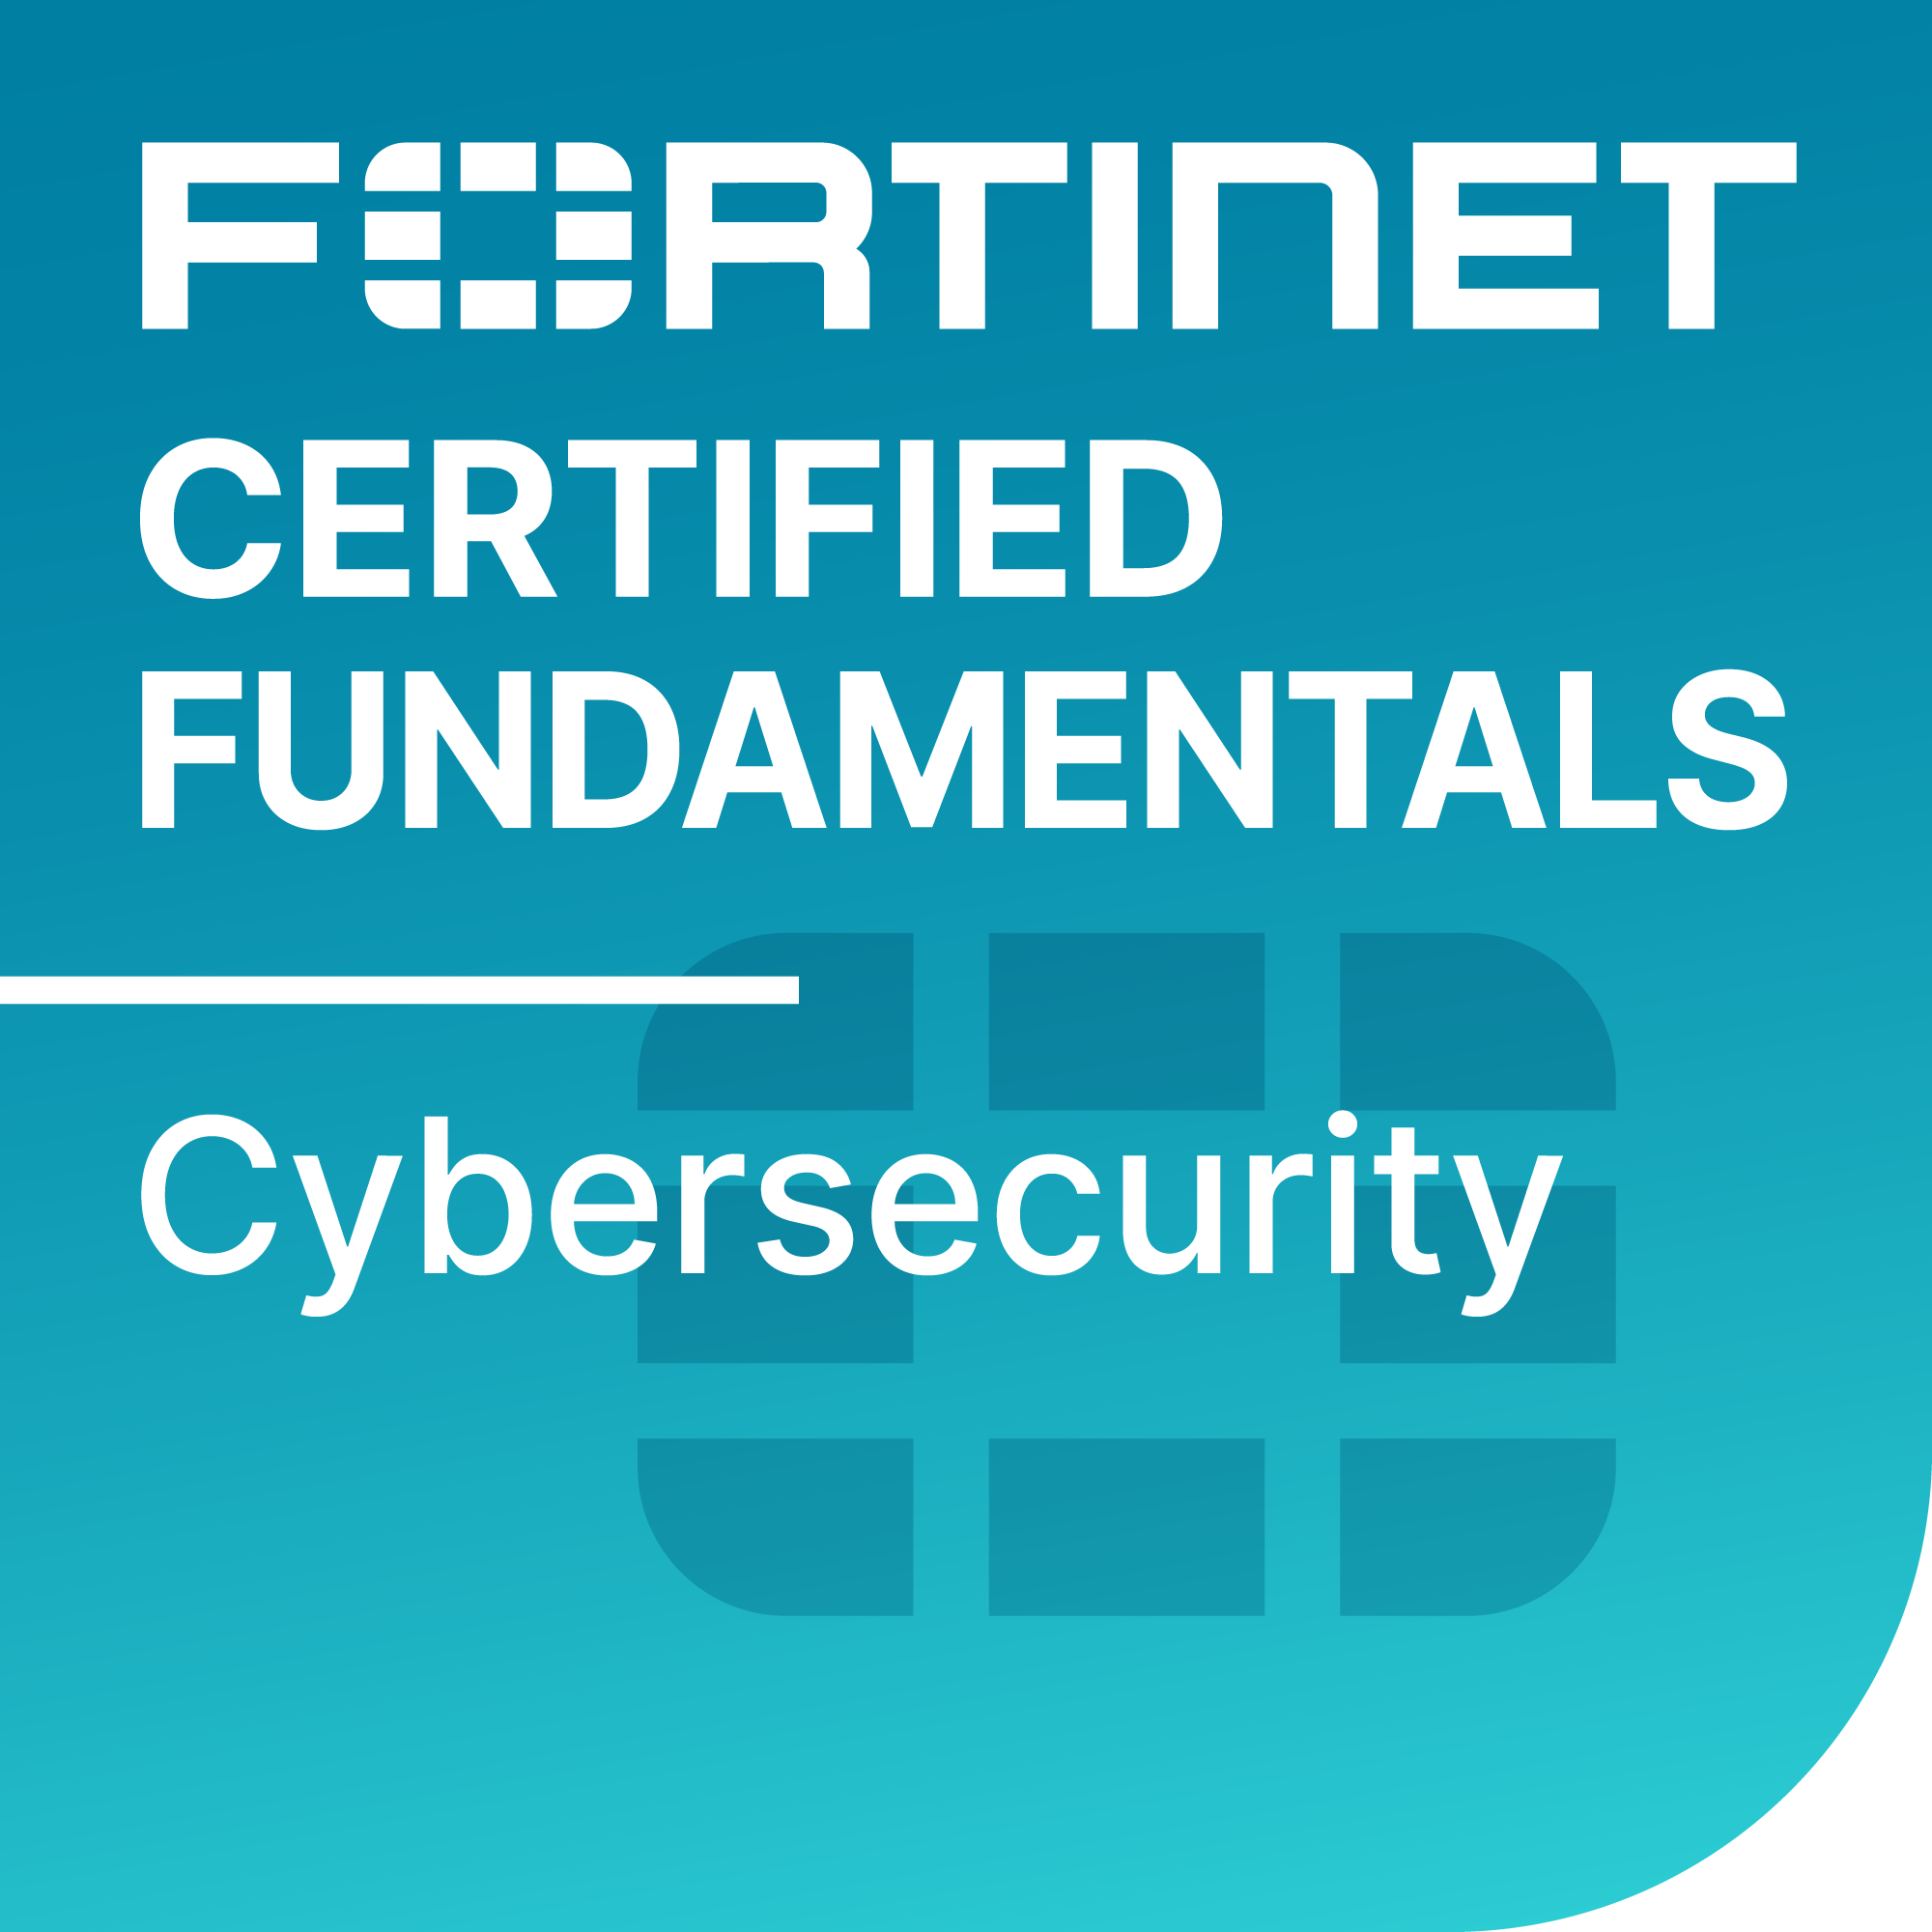 Fortinet Certified Fundamentals, Cybersecurity